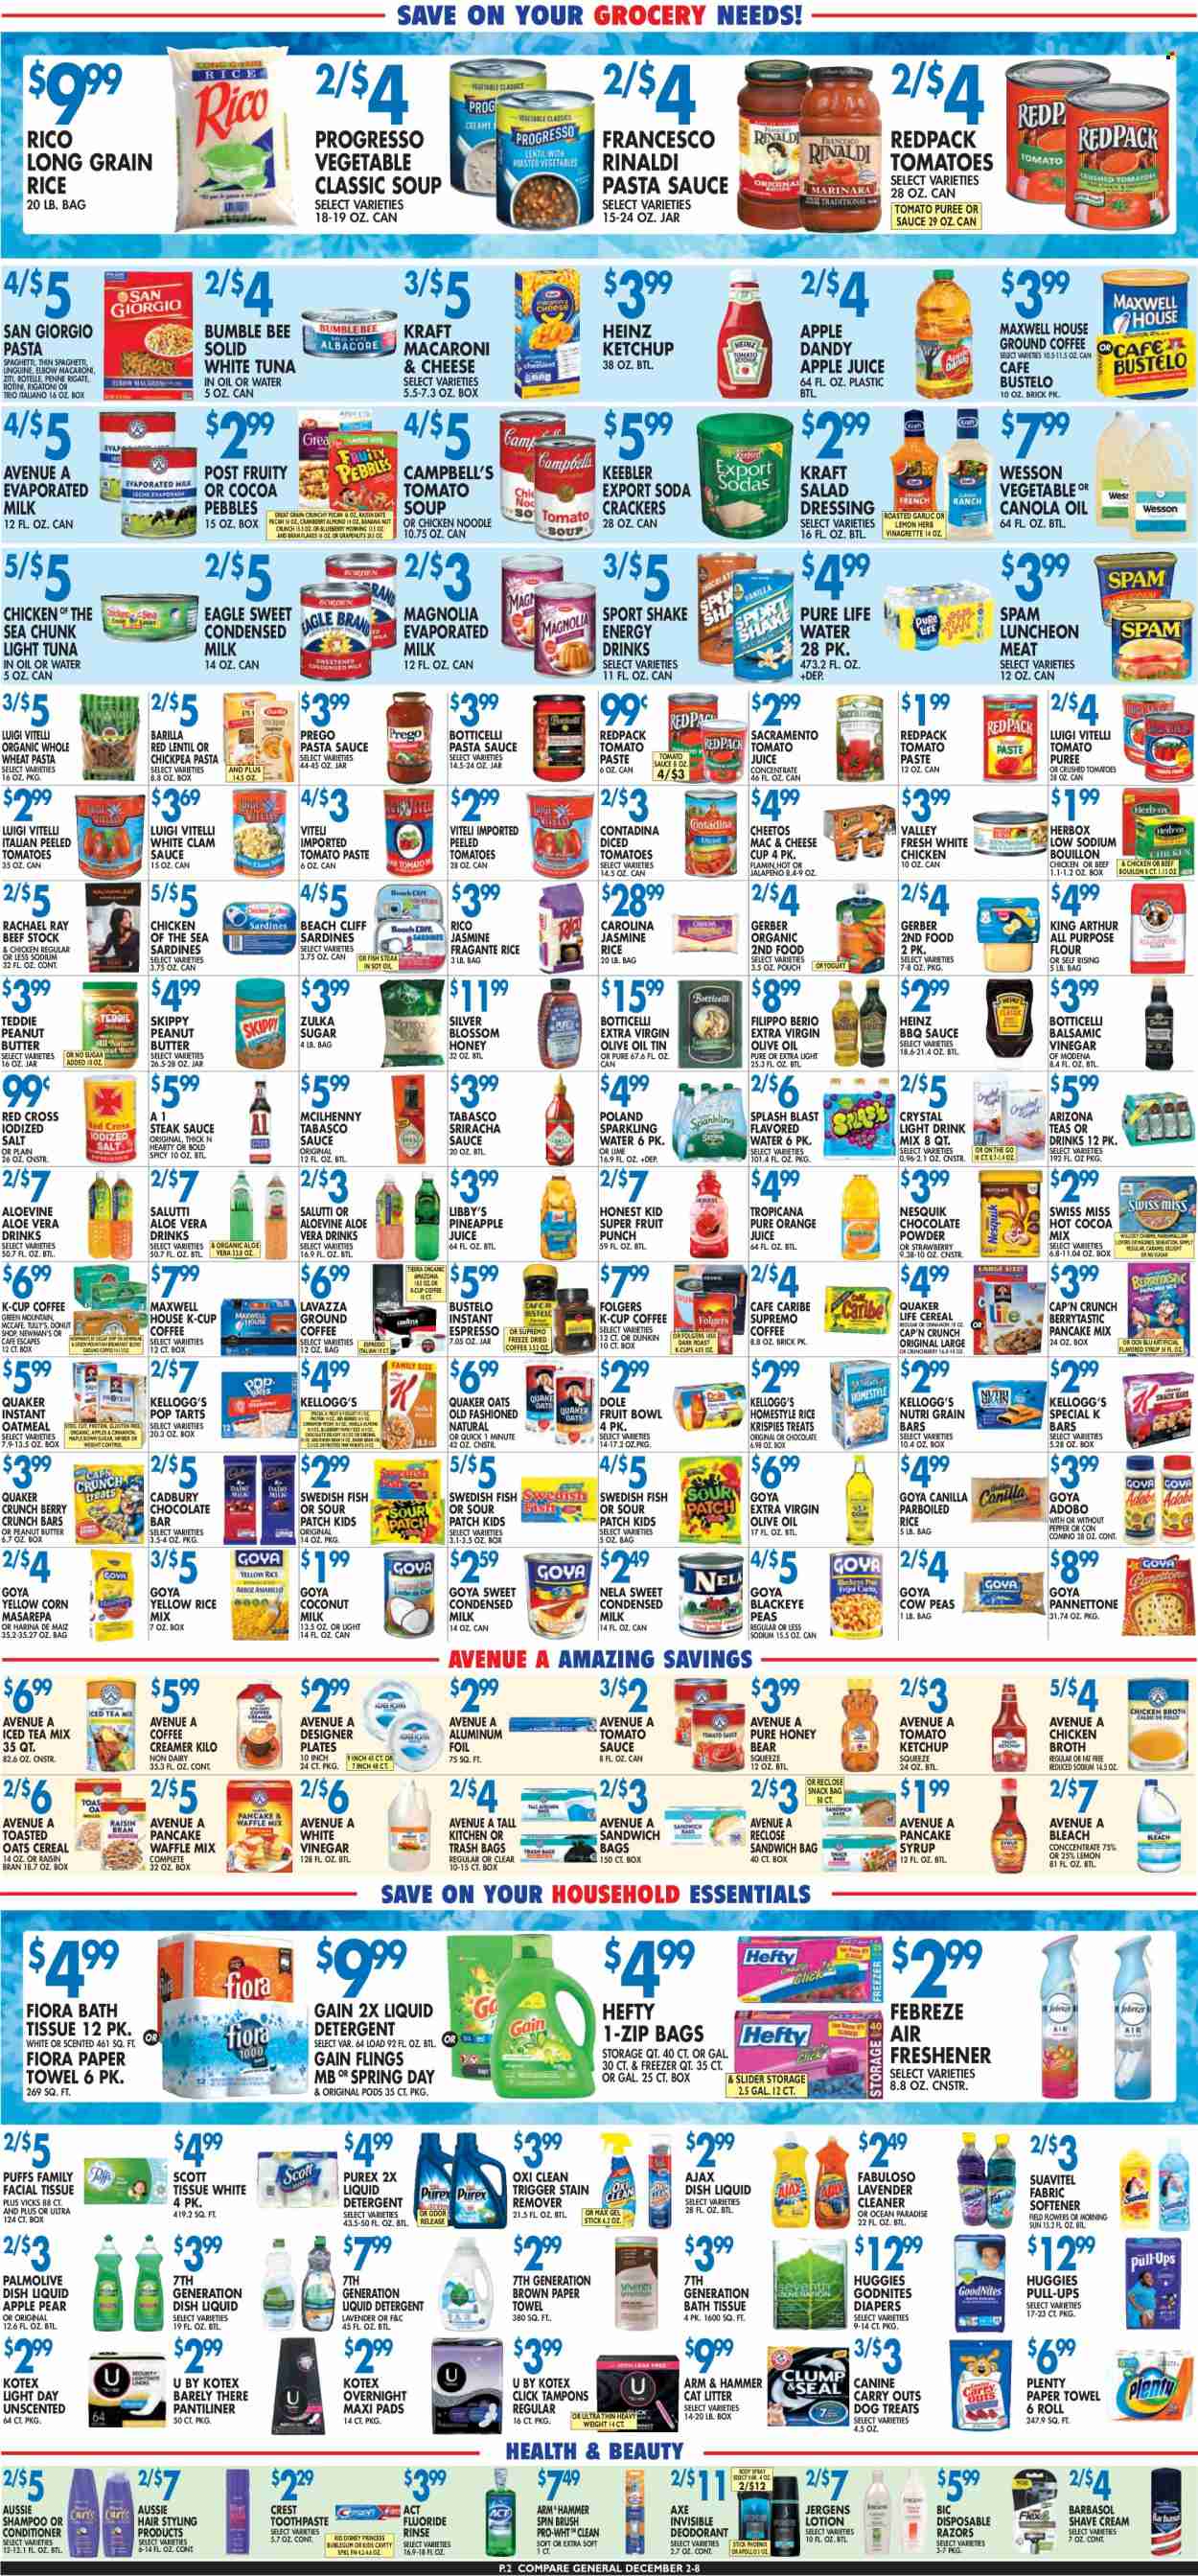 thumbnail - Compare Foods Flyer - 12/02/2022 - 12/08/2022 - Sales products - puffs, corn, peas, Dole, pineapple, pears, clams, sardines, tuna, fish steak, Campbell's, spaghetti, tomato soup, pasta sauce, soup, Bumble Bee, Barilla, Quaker, noodles, Progresso, Kraft®, Spam, lunch meat, cheese cup, Disney, yoghurt, Nesquik, Swiss Miss, evaporated milk, condensed milk, shake, Blossom, creamer, marshmallows, crackers, Kellogg's, Cadbury, Pop-Tarts, Keebler, Sour Patch, chocolate bar, Gerber, Cheetos, all purpose flour, ARM & HAMMER, bouillon, flour, tabasco, chicken broth, oatmeal, broth, coconut milk, crushed tomatoes, tomato paste, tomato sauce, Heinz, light tuna, tomato puree, Chicken of the Sea, Goya, diced tomatoes, cereals, Rice Krispies, bran flakes, Cap'n Crunch, Raisin Bran, Nutri-Grain, toasted oats, jasmine rice, parboiled rice, penne, long grain rice, cinnamon, adobo sauce, BBQ sauce, caramel, salad dressing, sriracha, steak sauce, ketchup, dressing, balsamic vinegar, canola oil, extra virgin olive oil, vinegar, olive oil, honey, pancake syrup, syrup, apple juice, tomato juice, pineapple juice, orange juice, juice, energy drink, ice tea, AriZona, fruit punch, flavored water, soda, sparkling water, Pure Life Water, hot cocoa, Maxwell House, Folgers, ground coffee, coffee capsules, McCafe, K-Cups, Lavazza, breakfast blend, Green Mountain, steak, cat litter, bowl, Vicks. Page 2.